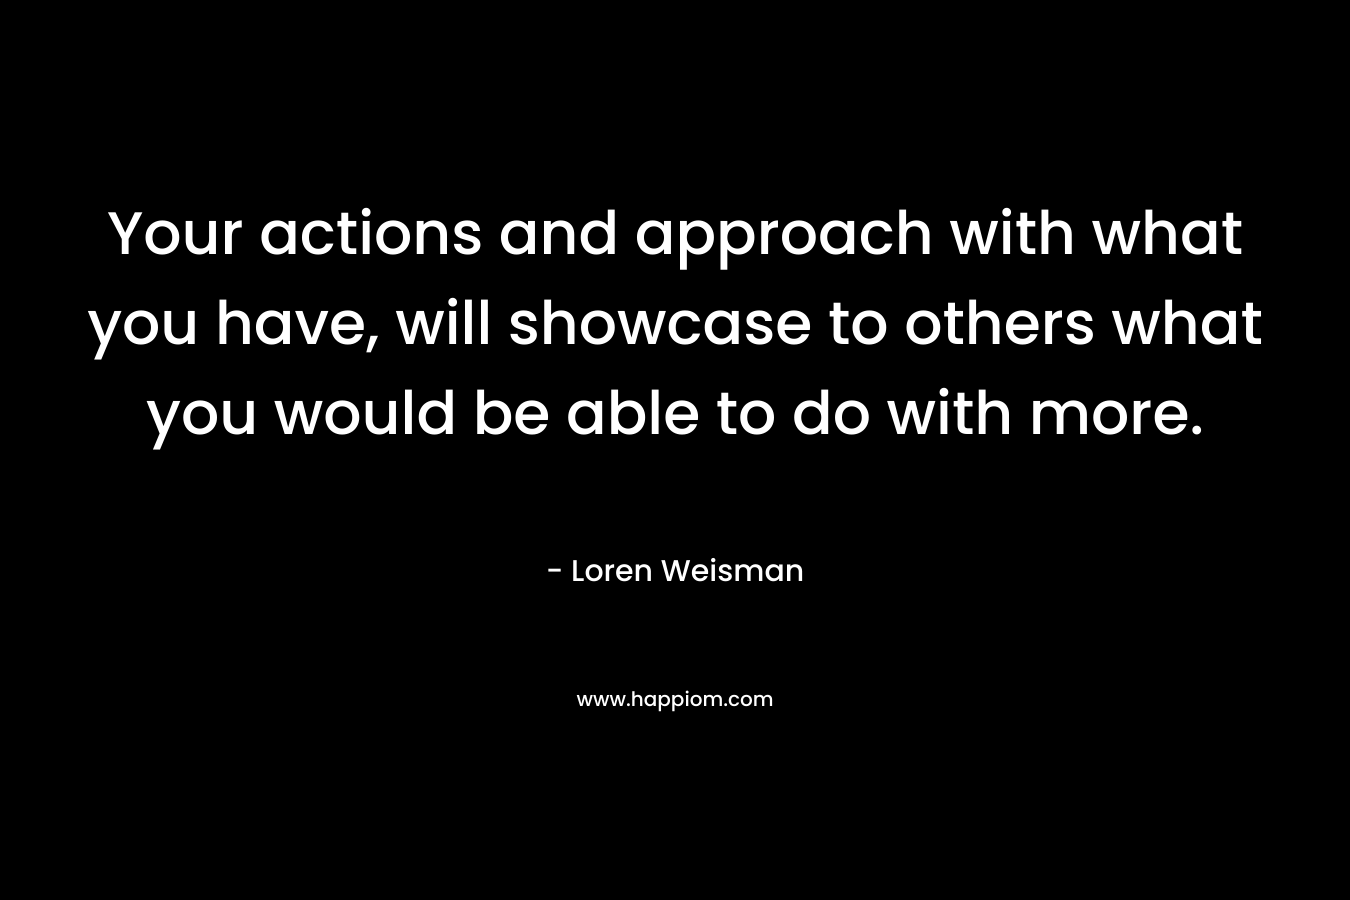 Your actions and approach with what you have, will showcase to others what you would be able to do with more. – Loren Weisman